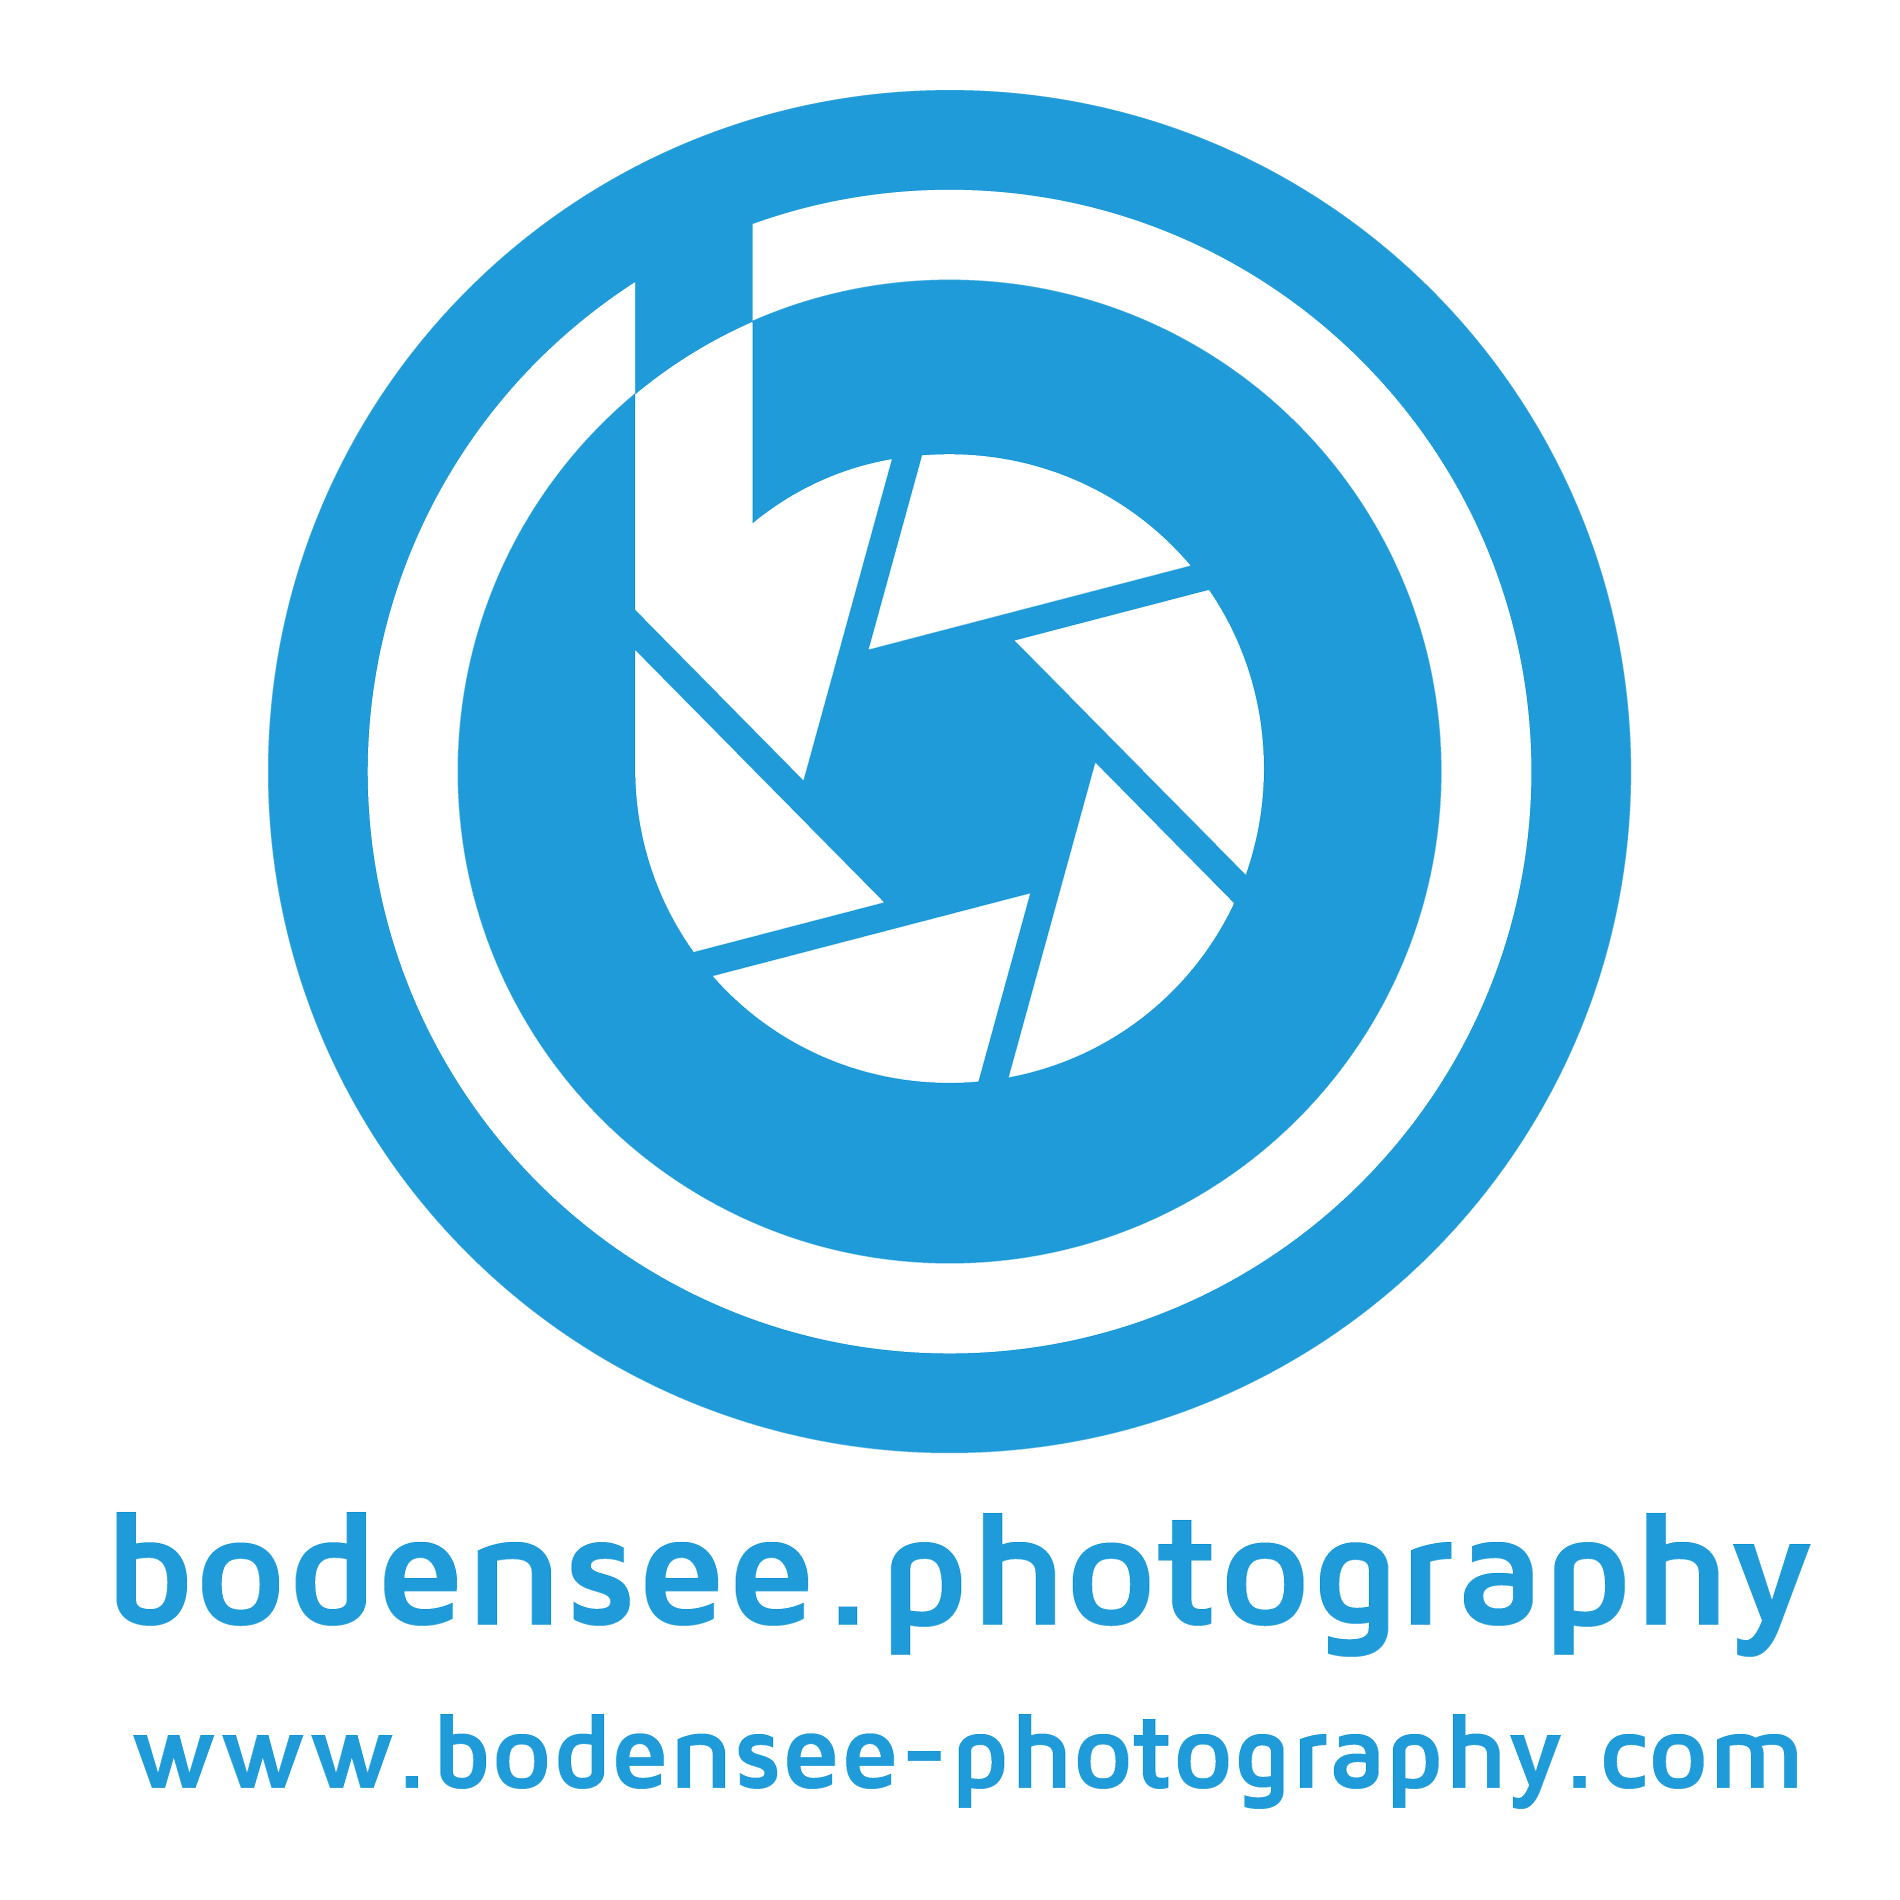 (c) Bodensee-photography.com